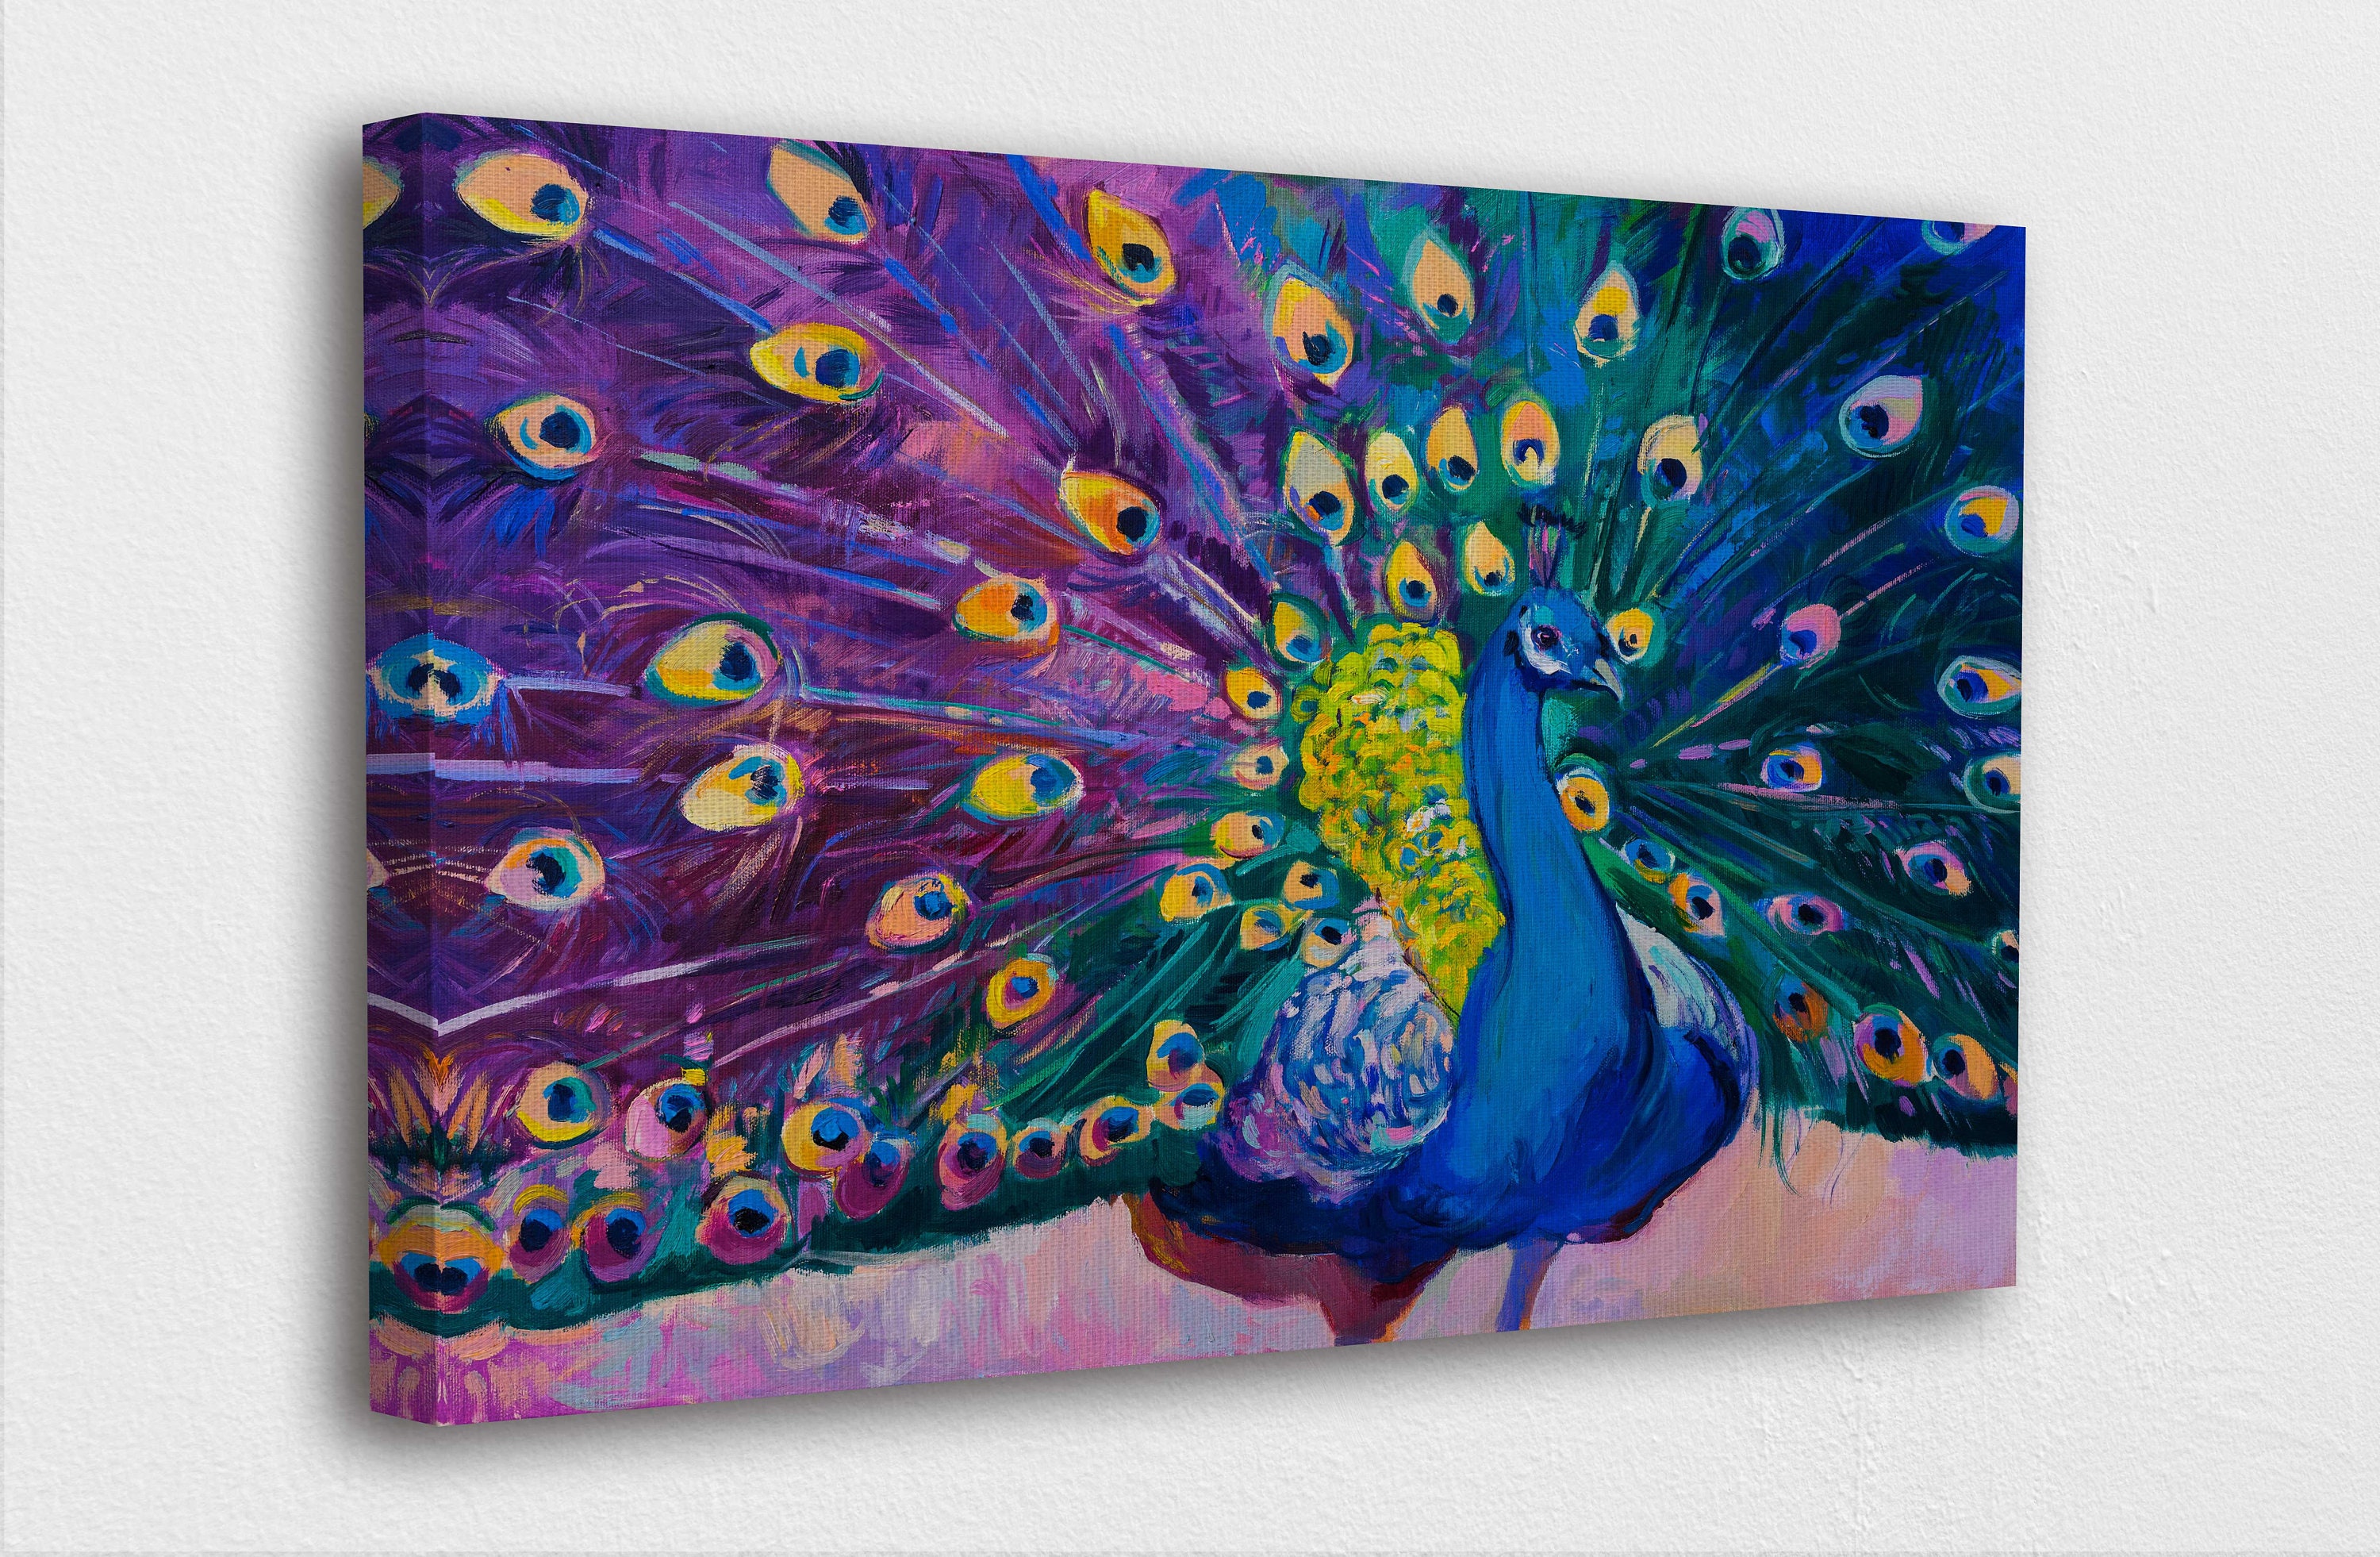 Painting Style Art Canvas-Colorful Peacock Feather Art Canvas | Etsy